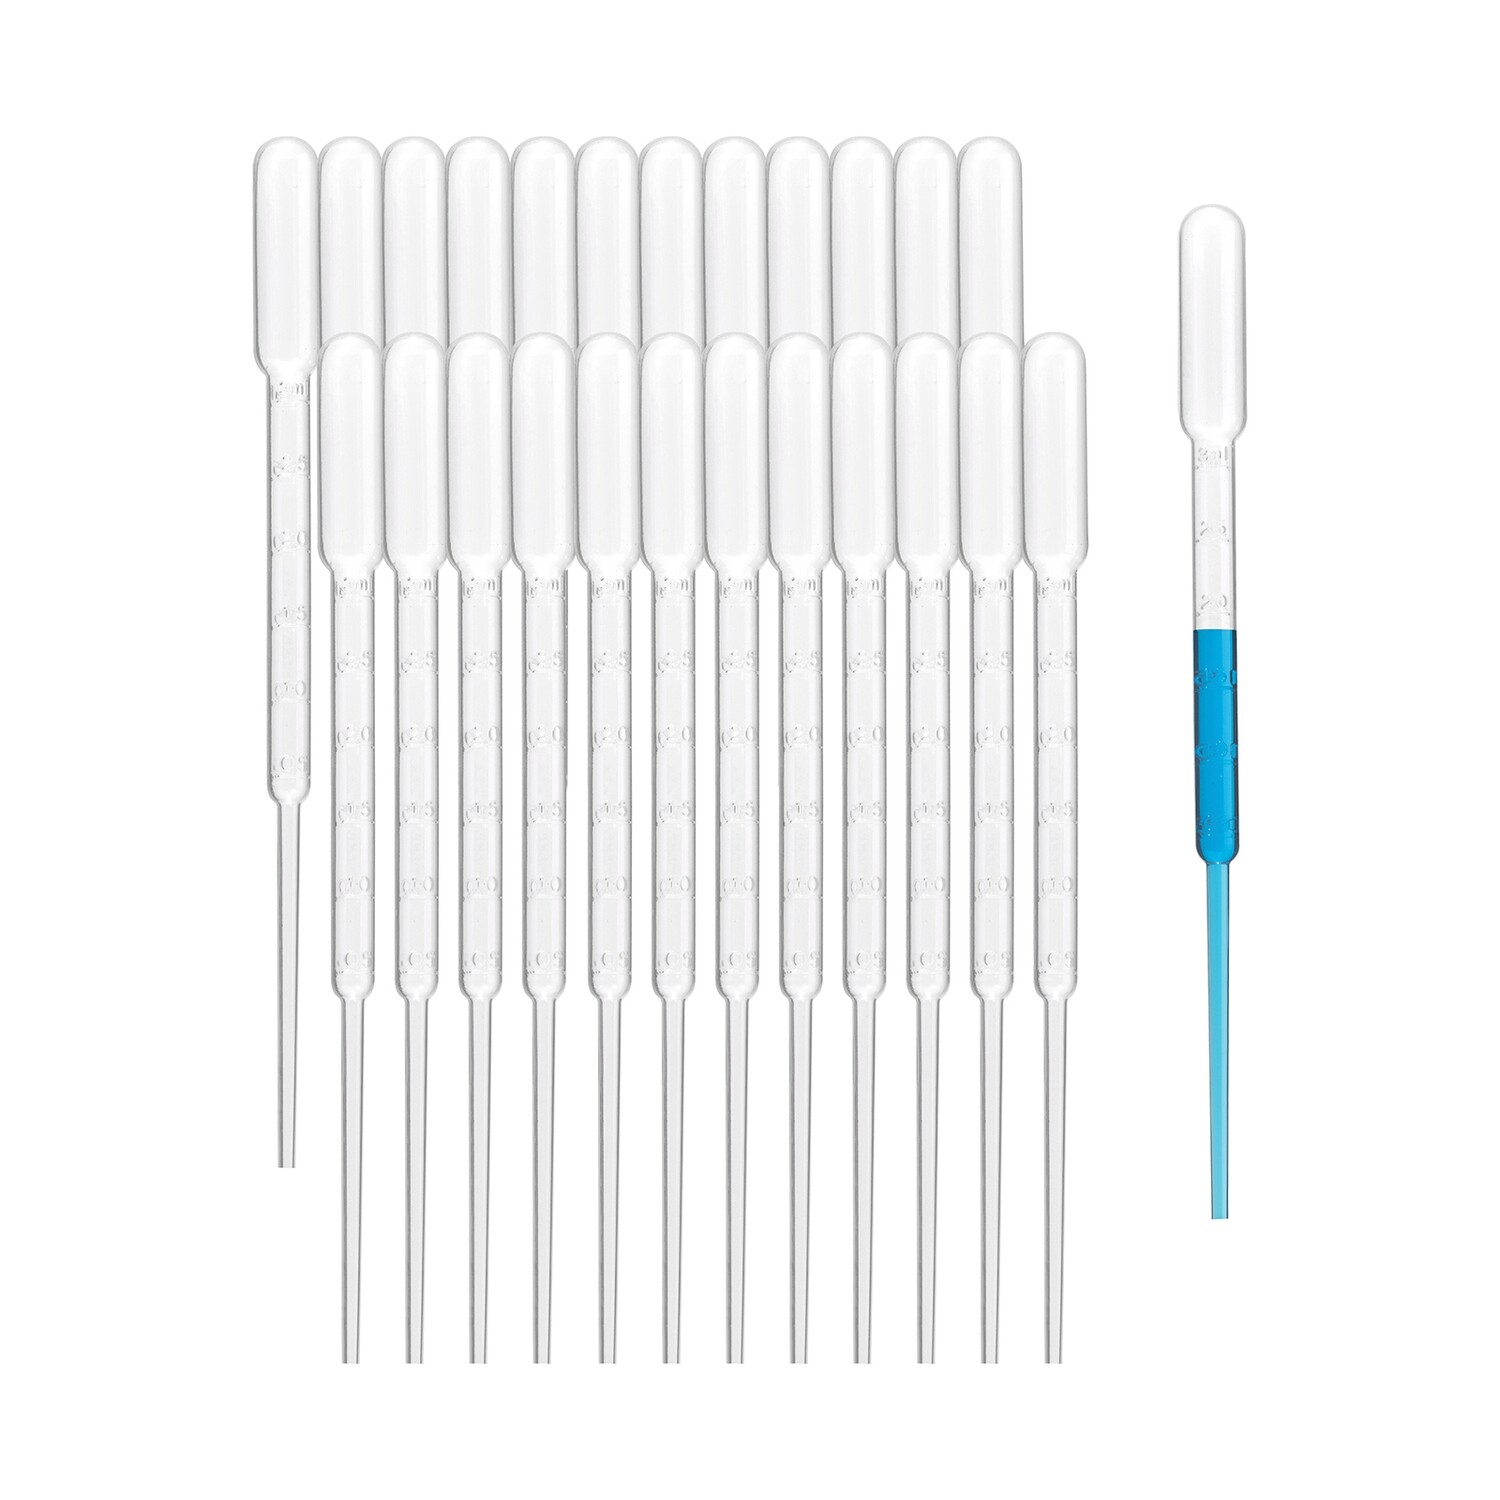 Biologix Transfer Pipets- Sterile 3ml (184mm Individually Wrapped), 500 Pieces/Pack, 4 Packs/Case